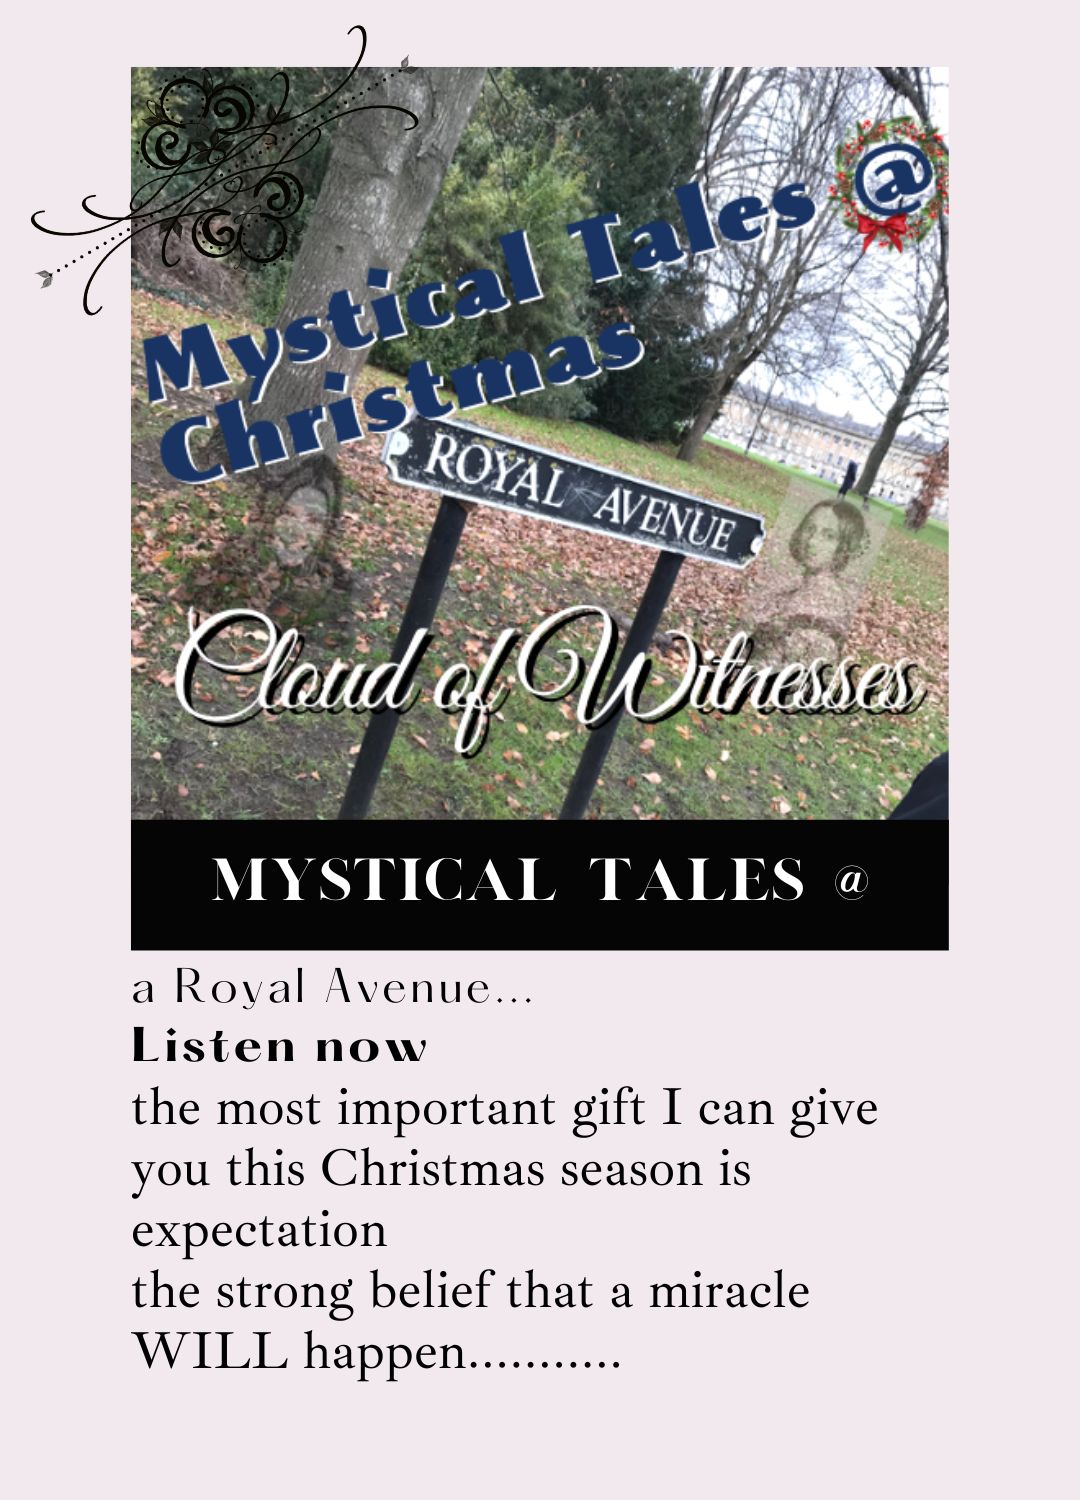 Intentional Now Podcast Episode Mystical Tales @ Christmas Could of Witnesses 